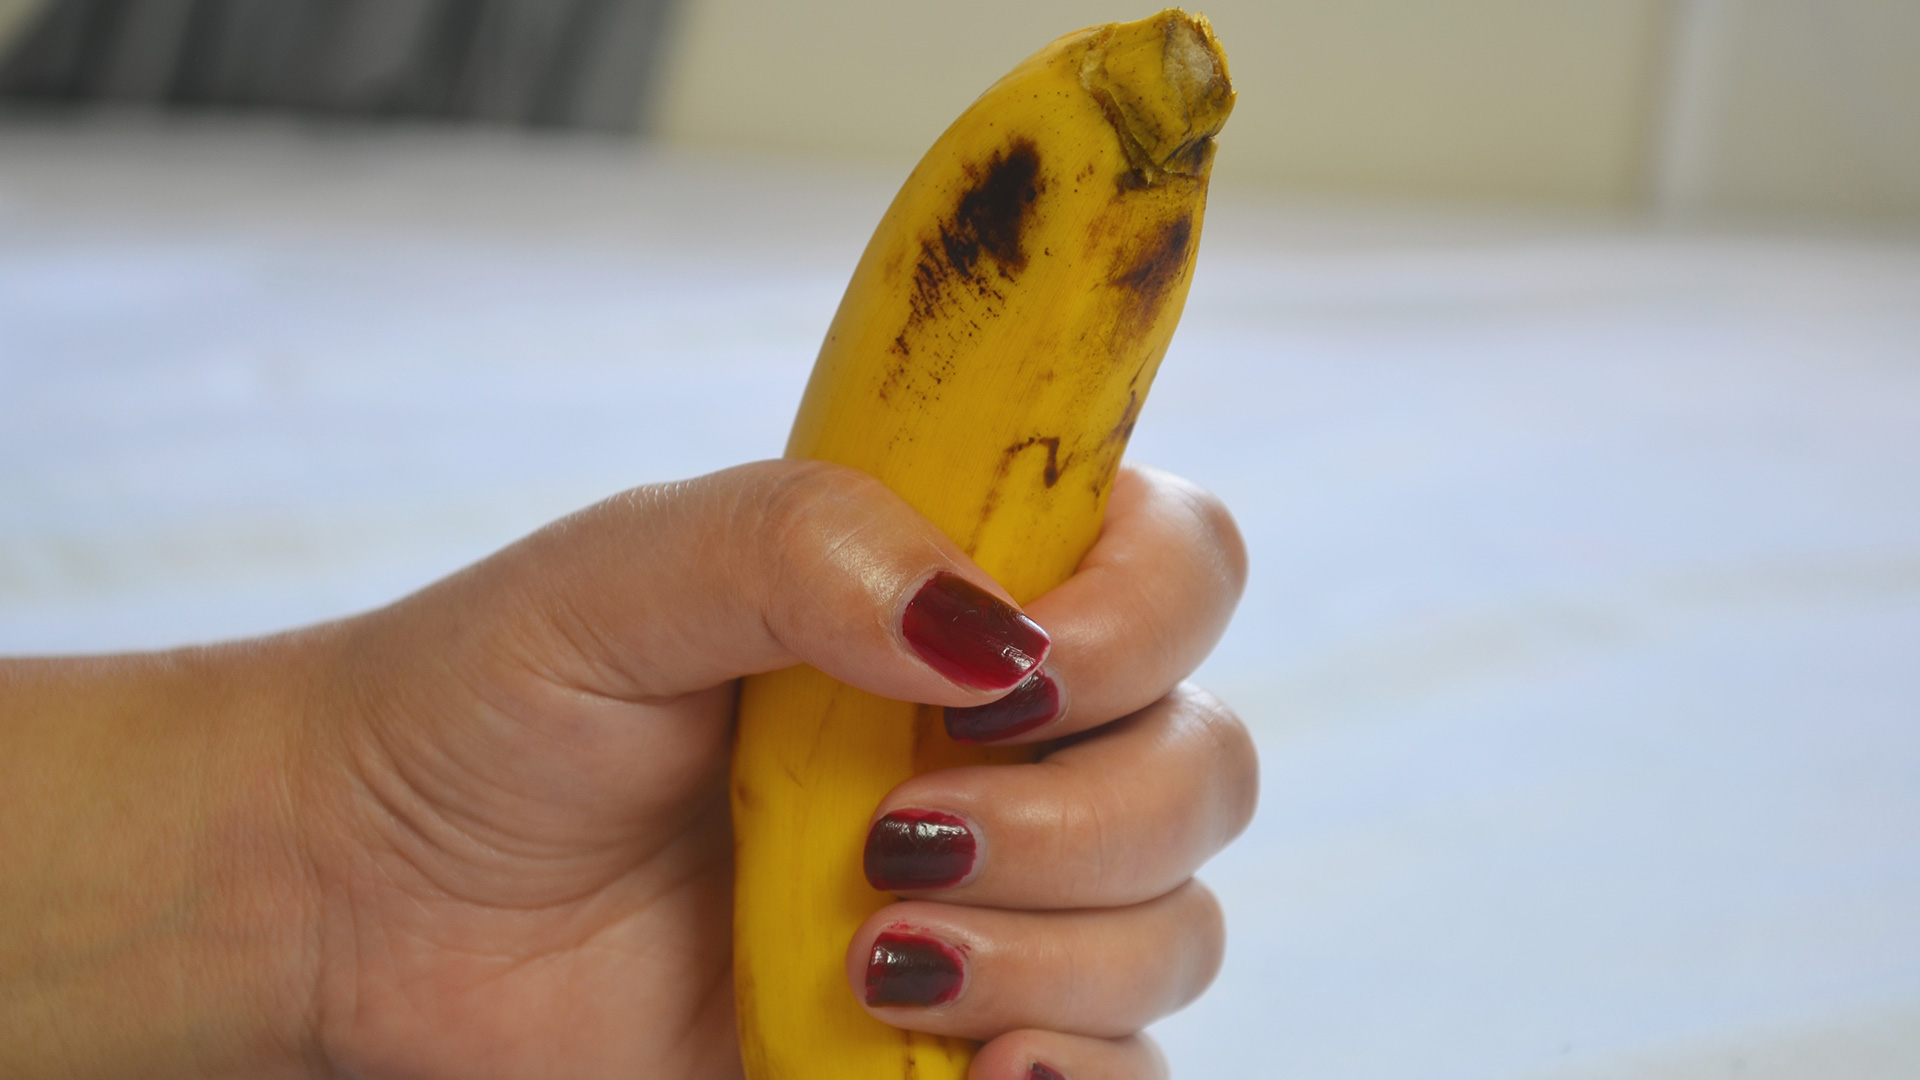 Hand of a woman with red nails gripping a ripe banana.